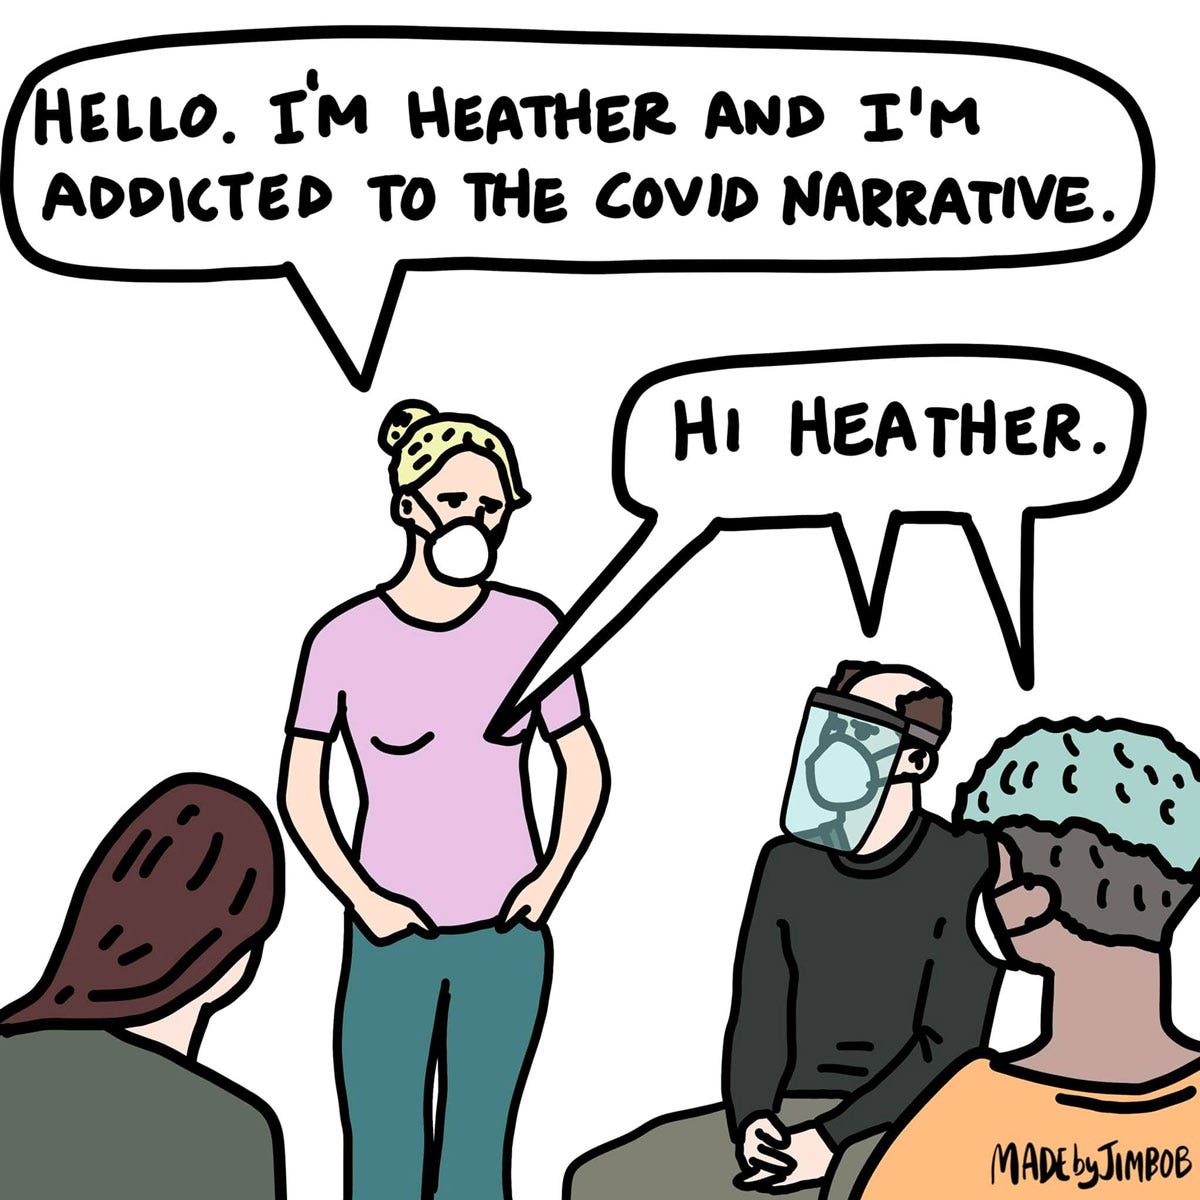 Made by JimBob: Addicted to the COVID Narrative